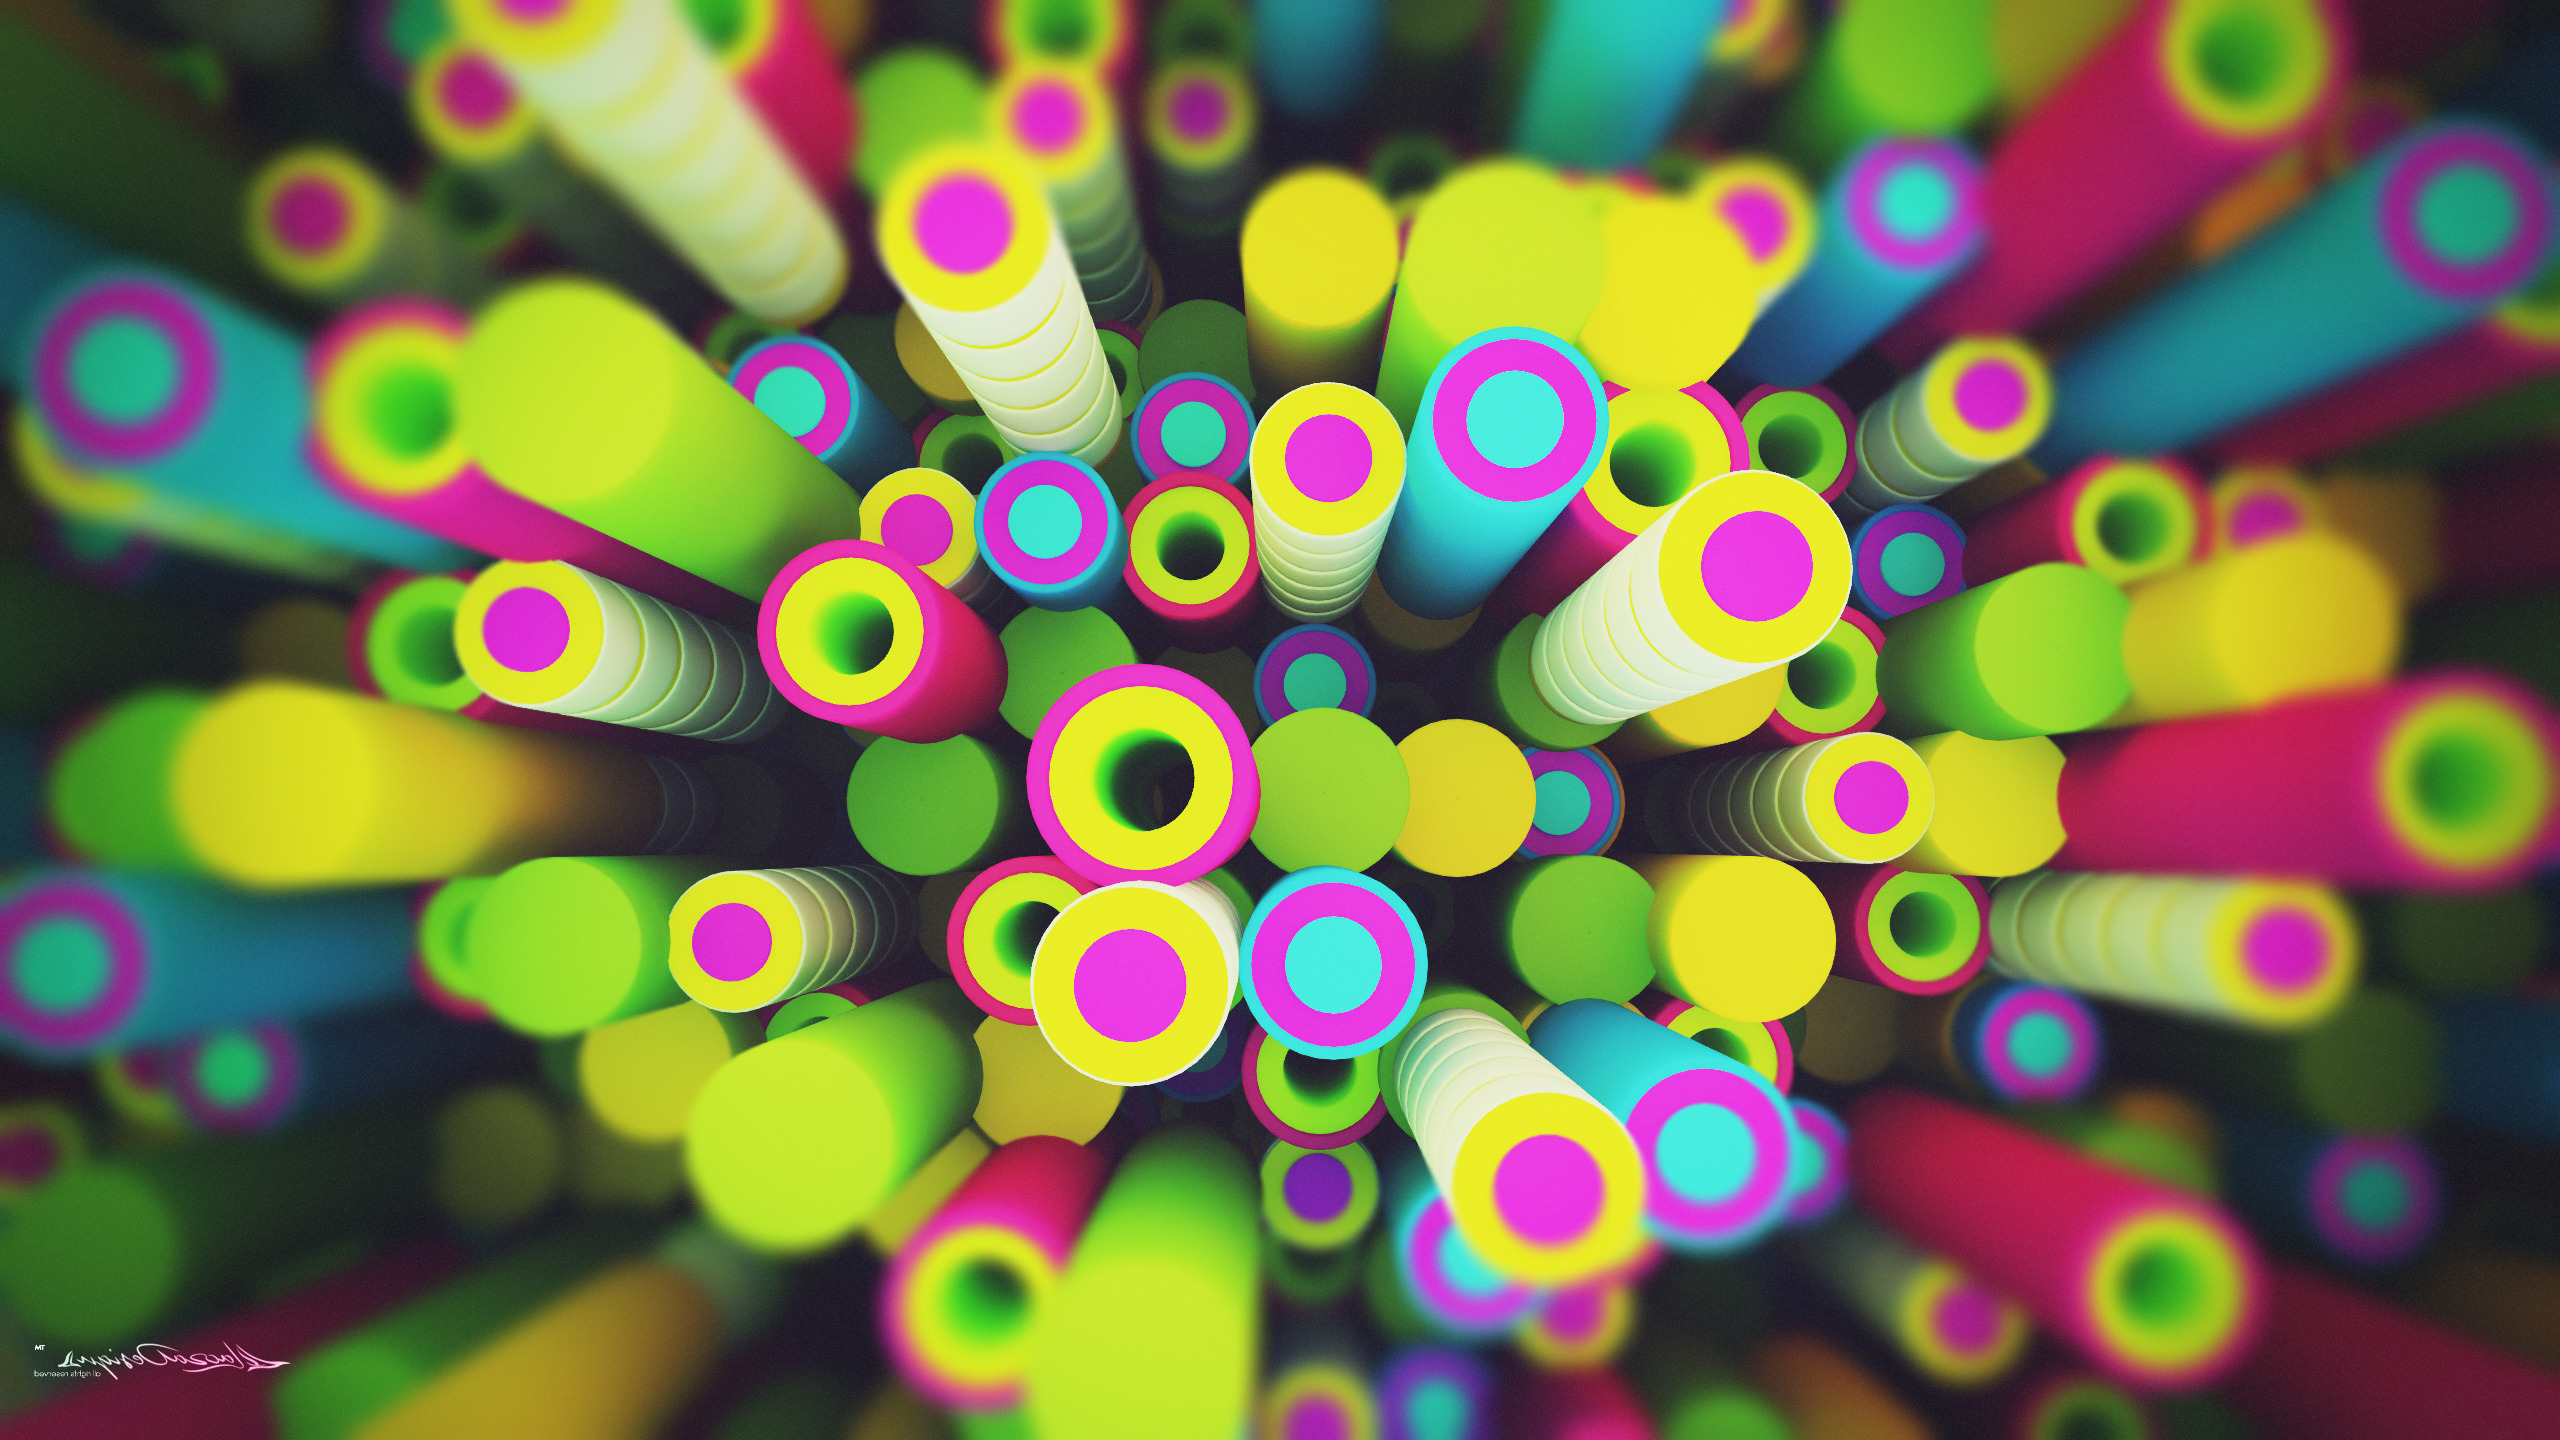 Lacza, Digital Art, Abstract, Sphere, Circle, Colorful, Pipes, 3D Wallpaper